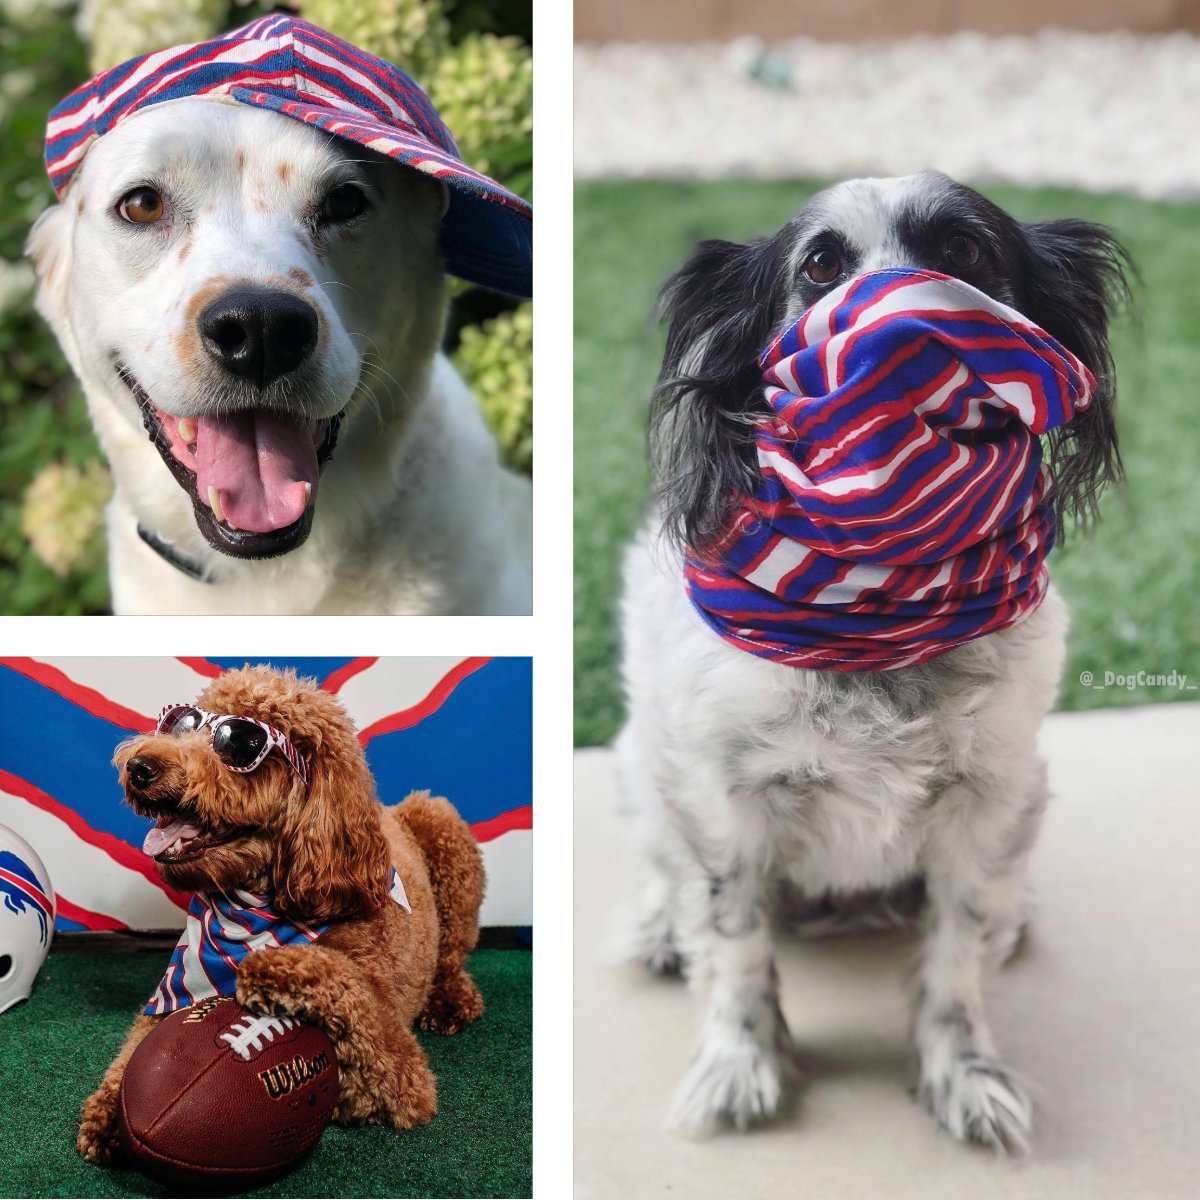 🐾 Where my dogs at? 🐾 Meet the squad: @andrew_tikka_remi_ , @los.dood , and @_dogcandy_ , lookin’ fly in there Zubaz gear!
.
.
.
#PawsomeStyle #DareToBeDifferent #FashionForward #DoggoSwagger #DogLovers #StylinAndProfilin #PetFashion #WhereMyDogsAt